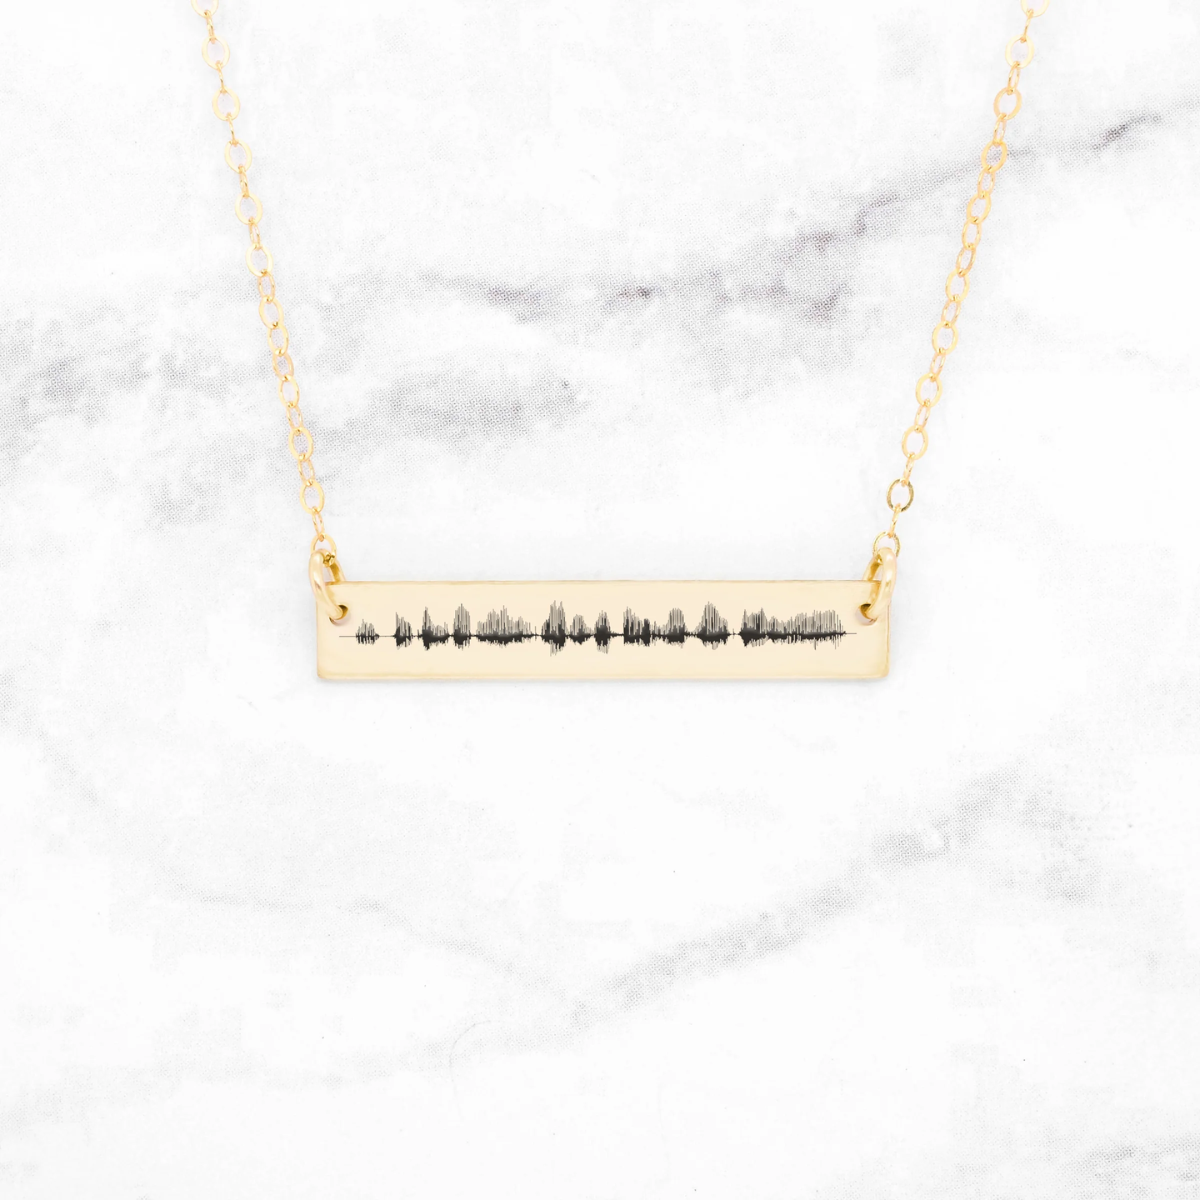 15. Capture Your Love in Soundwaves: Personalized Necklace for a Unique Anniversary Gift